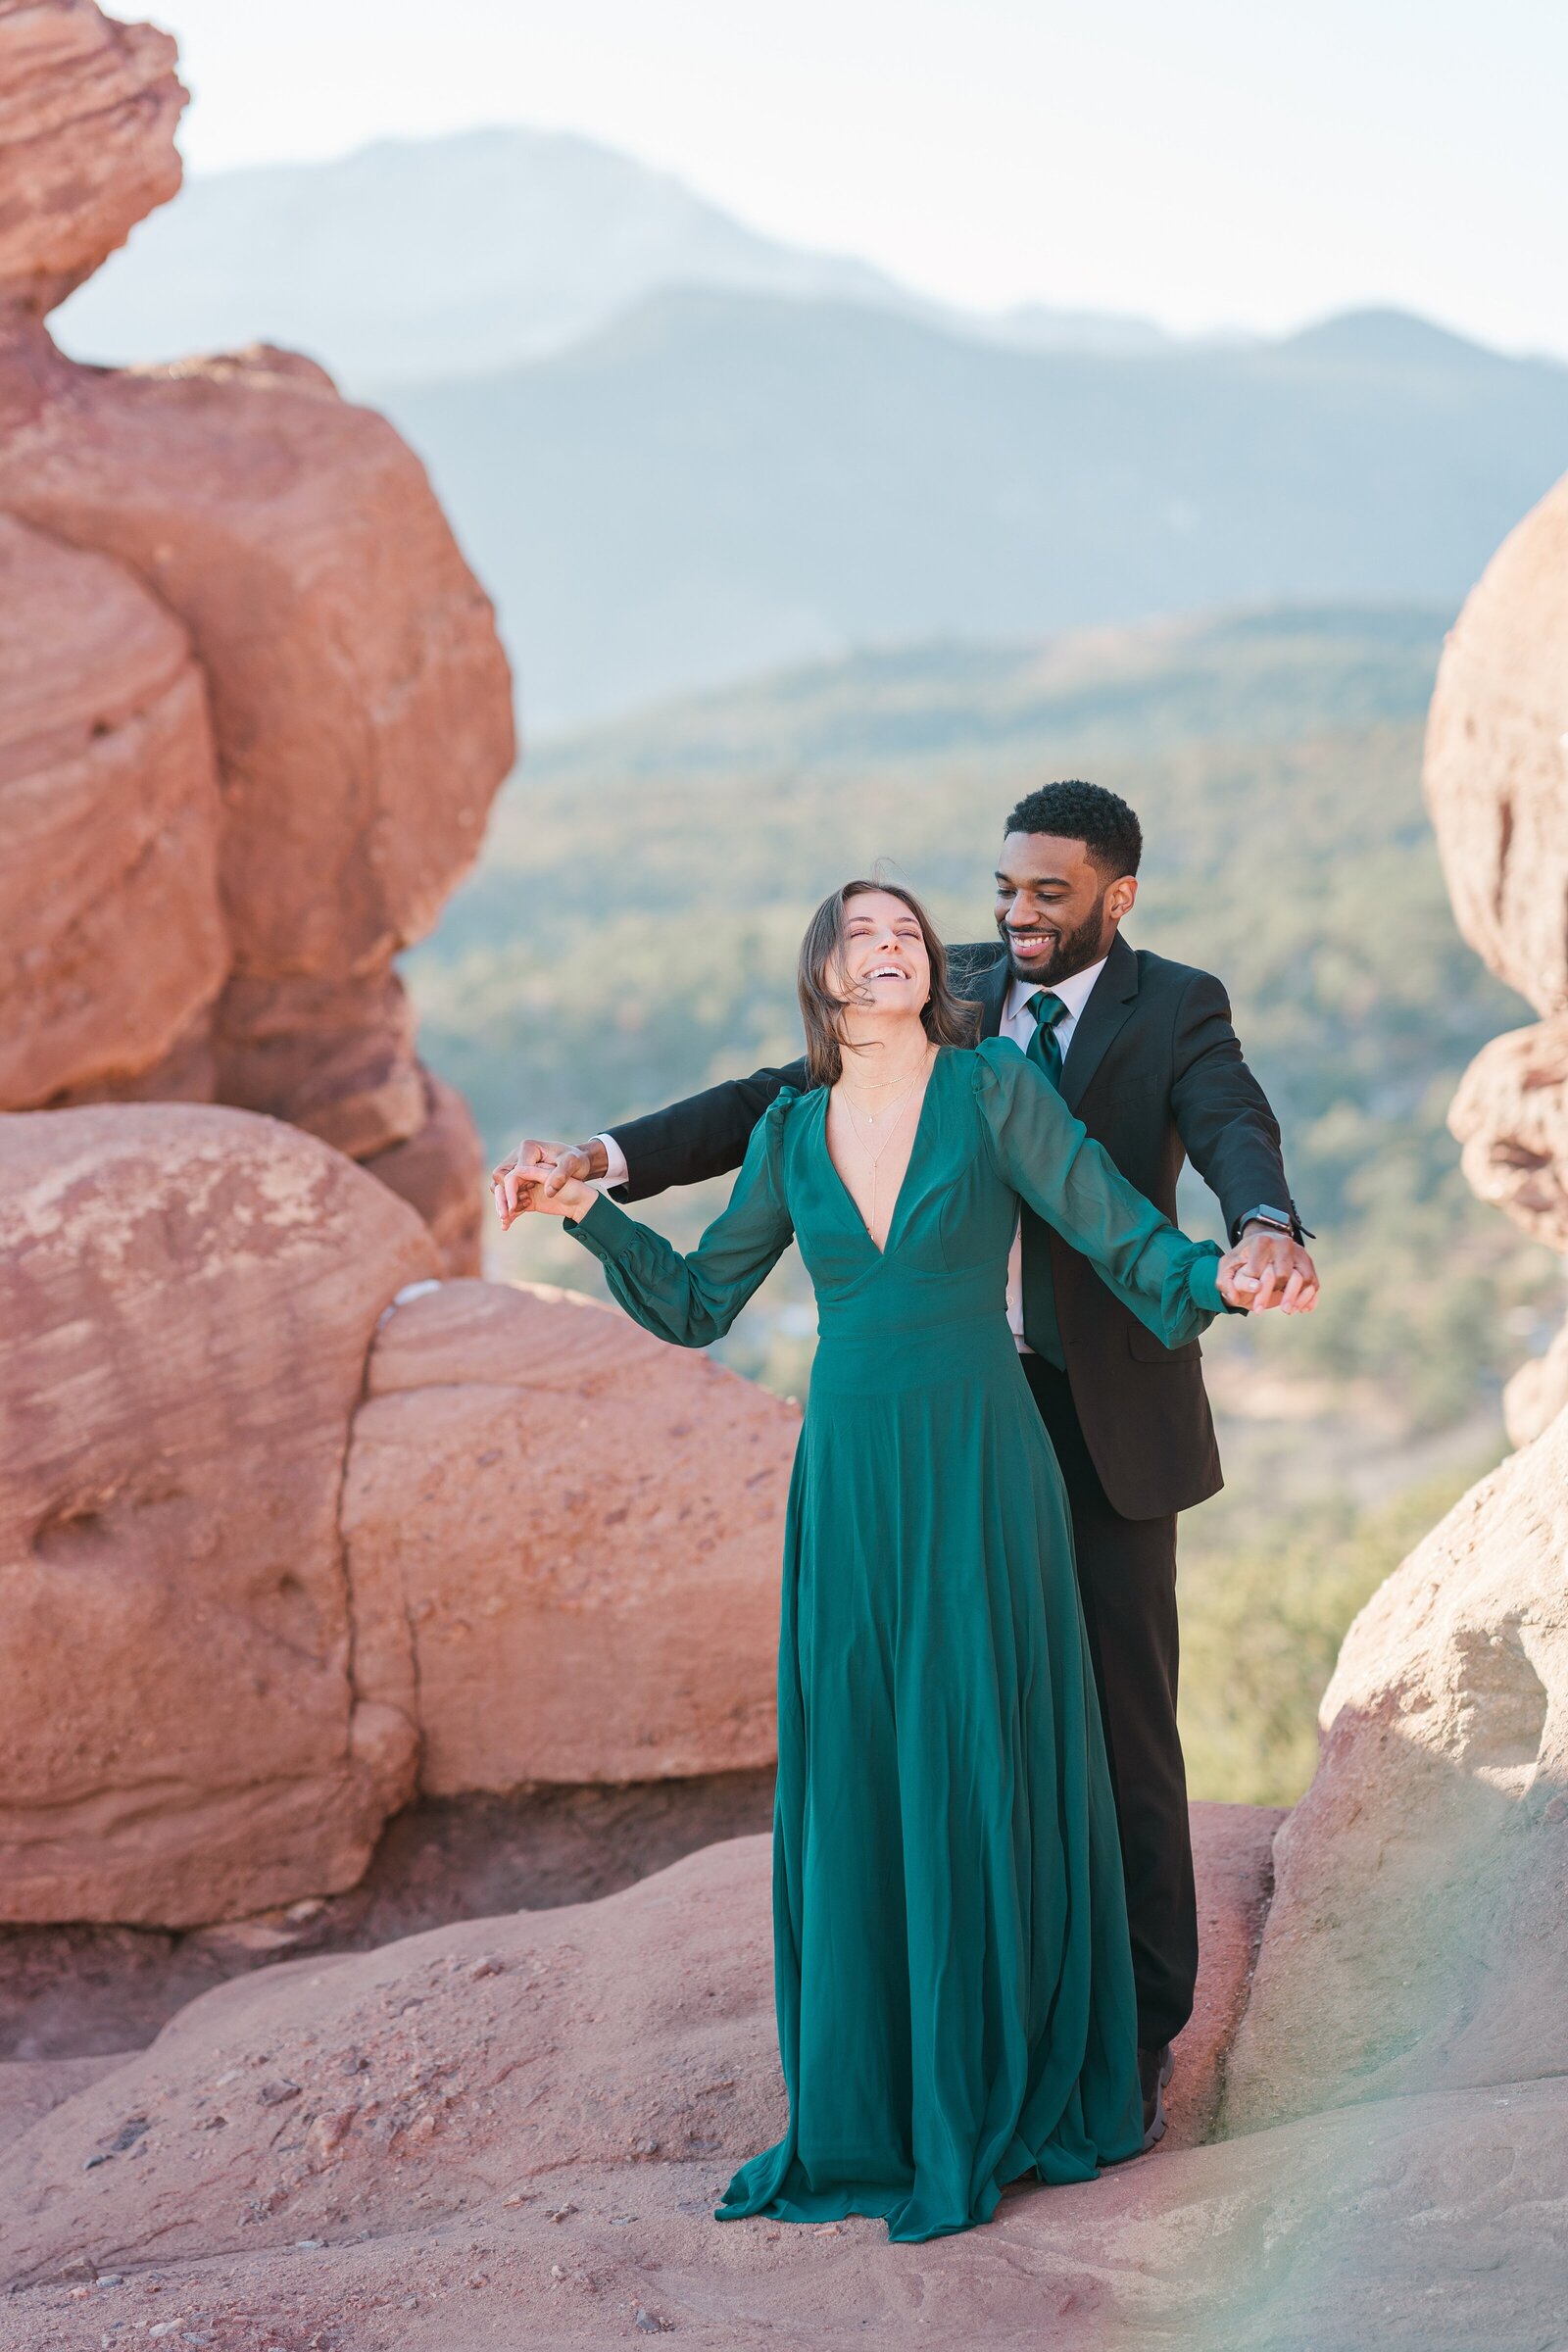 Outdoor Wedding Photography in Colorado" - Celebrate your love in the great outdoors with natural and authentic photography to capture your special day.